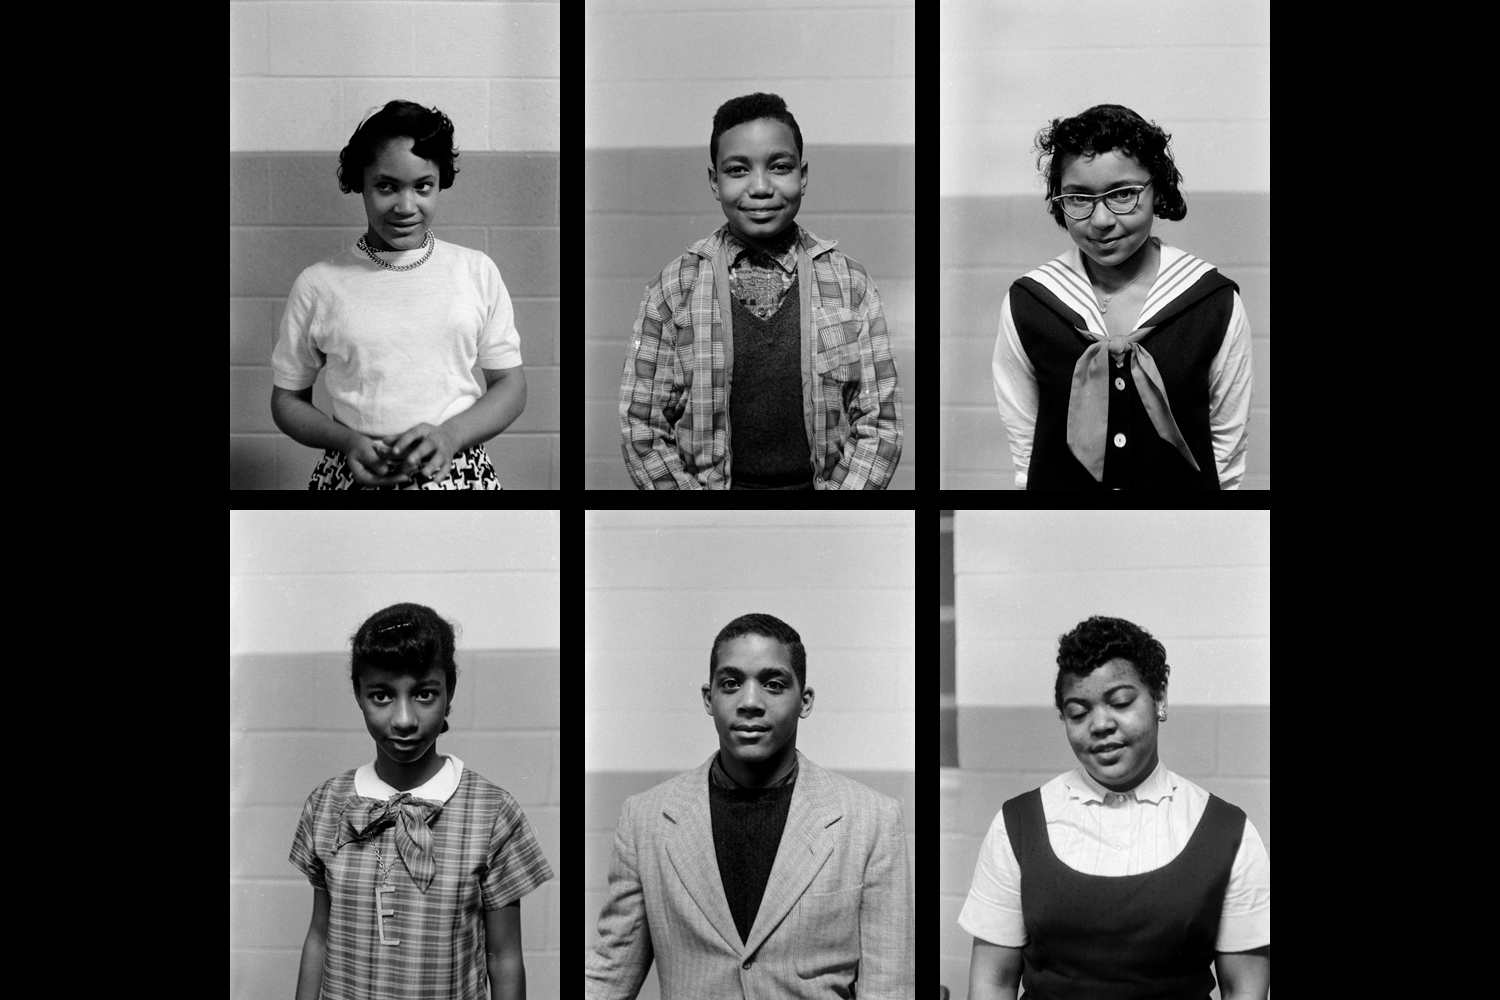 Six of the "Norfolk 17" -- students who integrated Virginia schools in 1959: Lower row: LaVera Forbes, Freddy Gonsouland, Johnnie Rouse; upper row: Lolita Portis, James Turner Jr., Claudia Wellington.